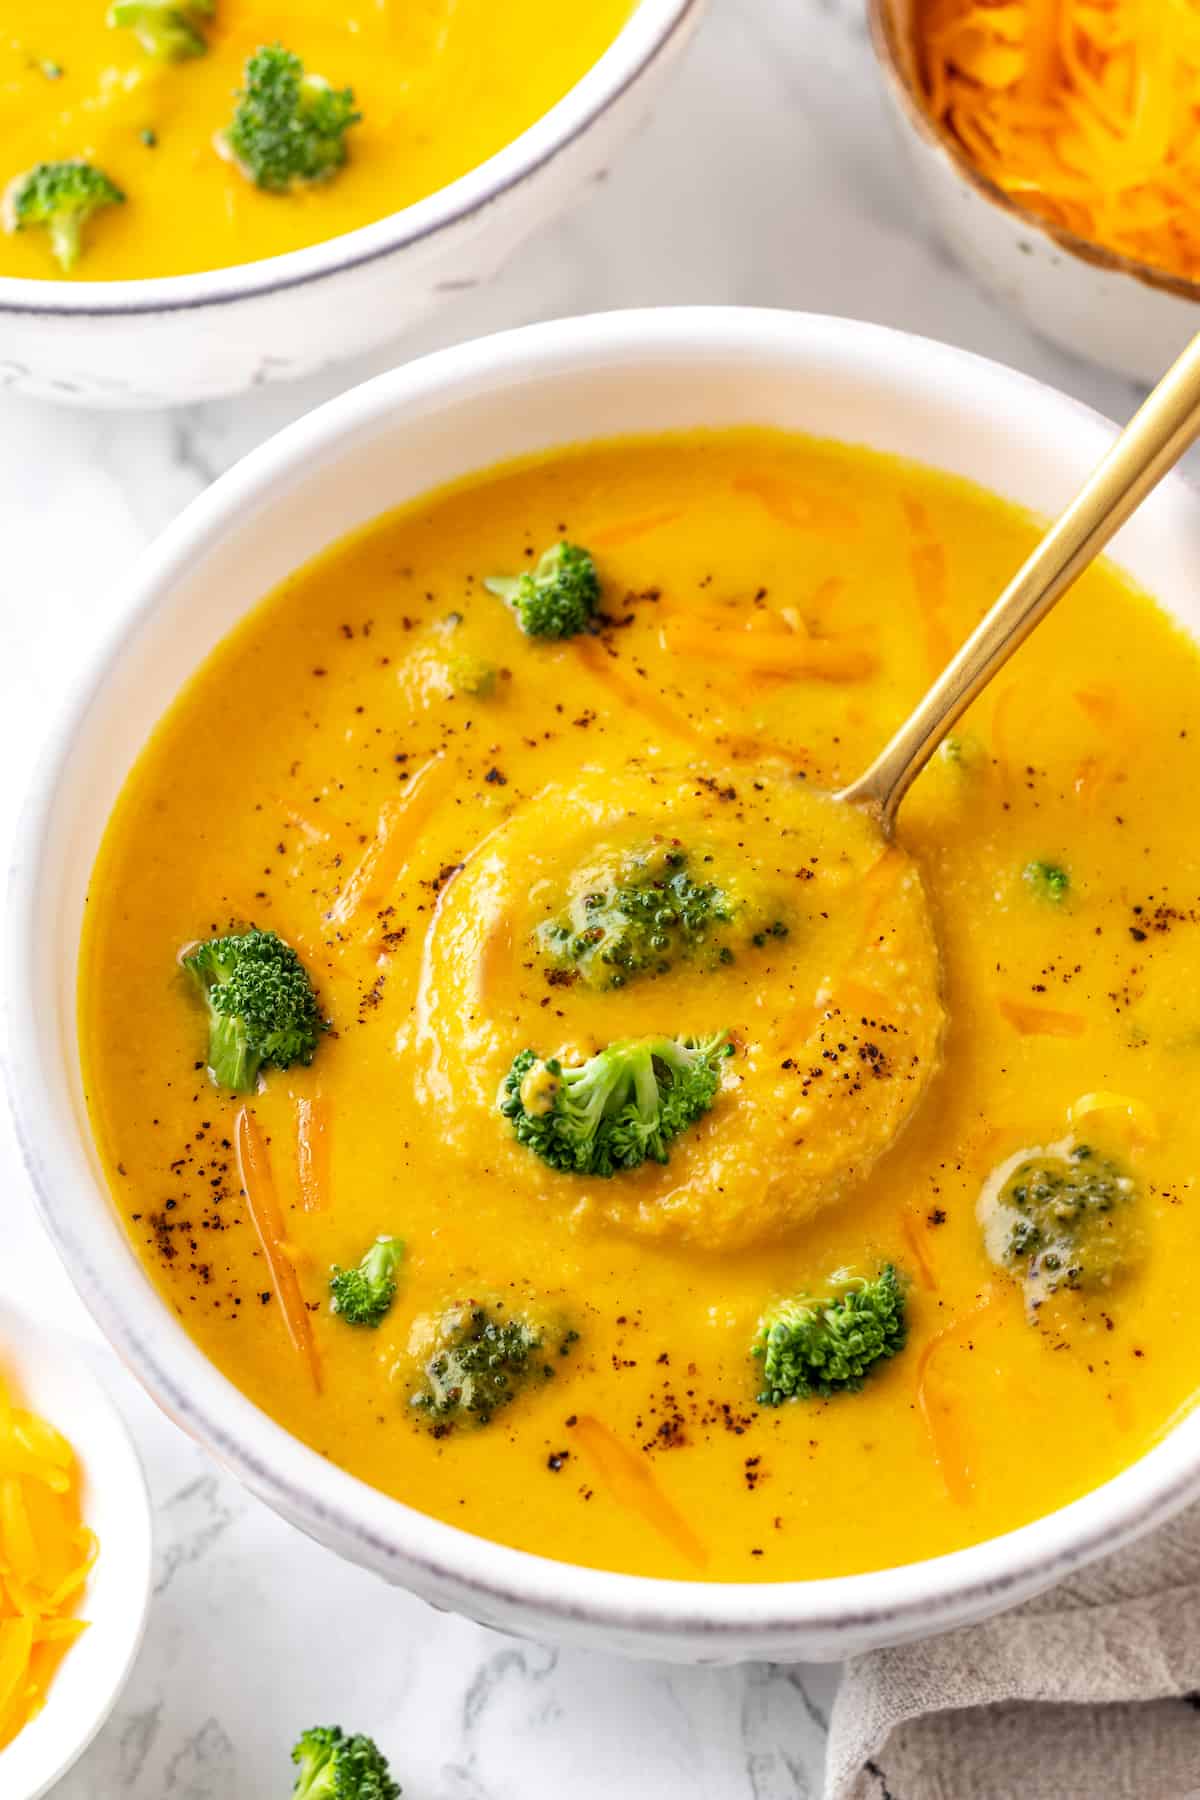 Overhead view of rich, creamy vegan broccoli cheddar soup in bowl with spoon